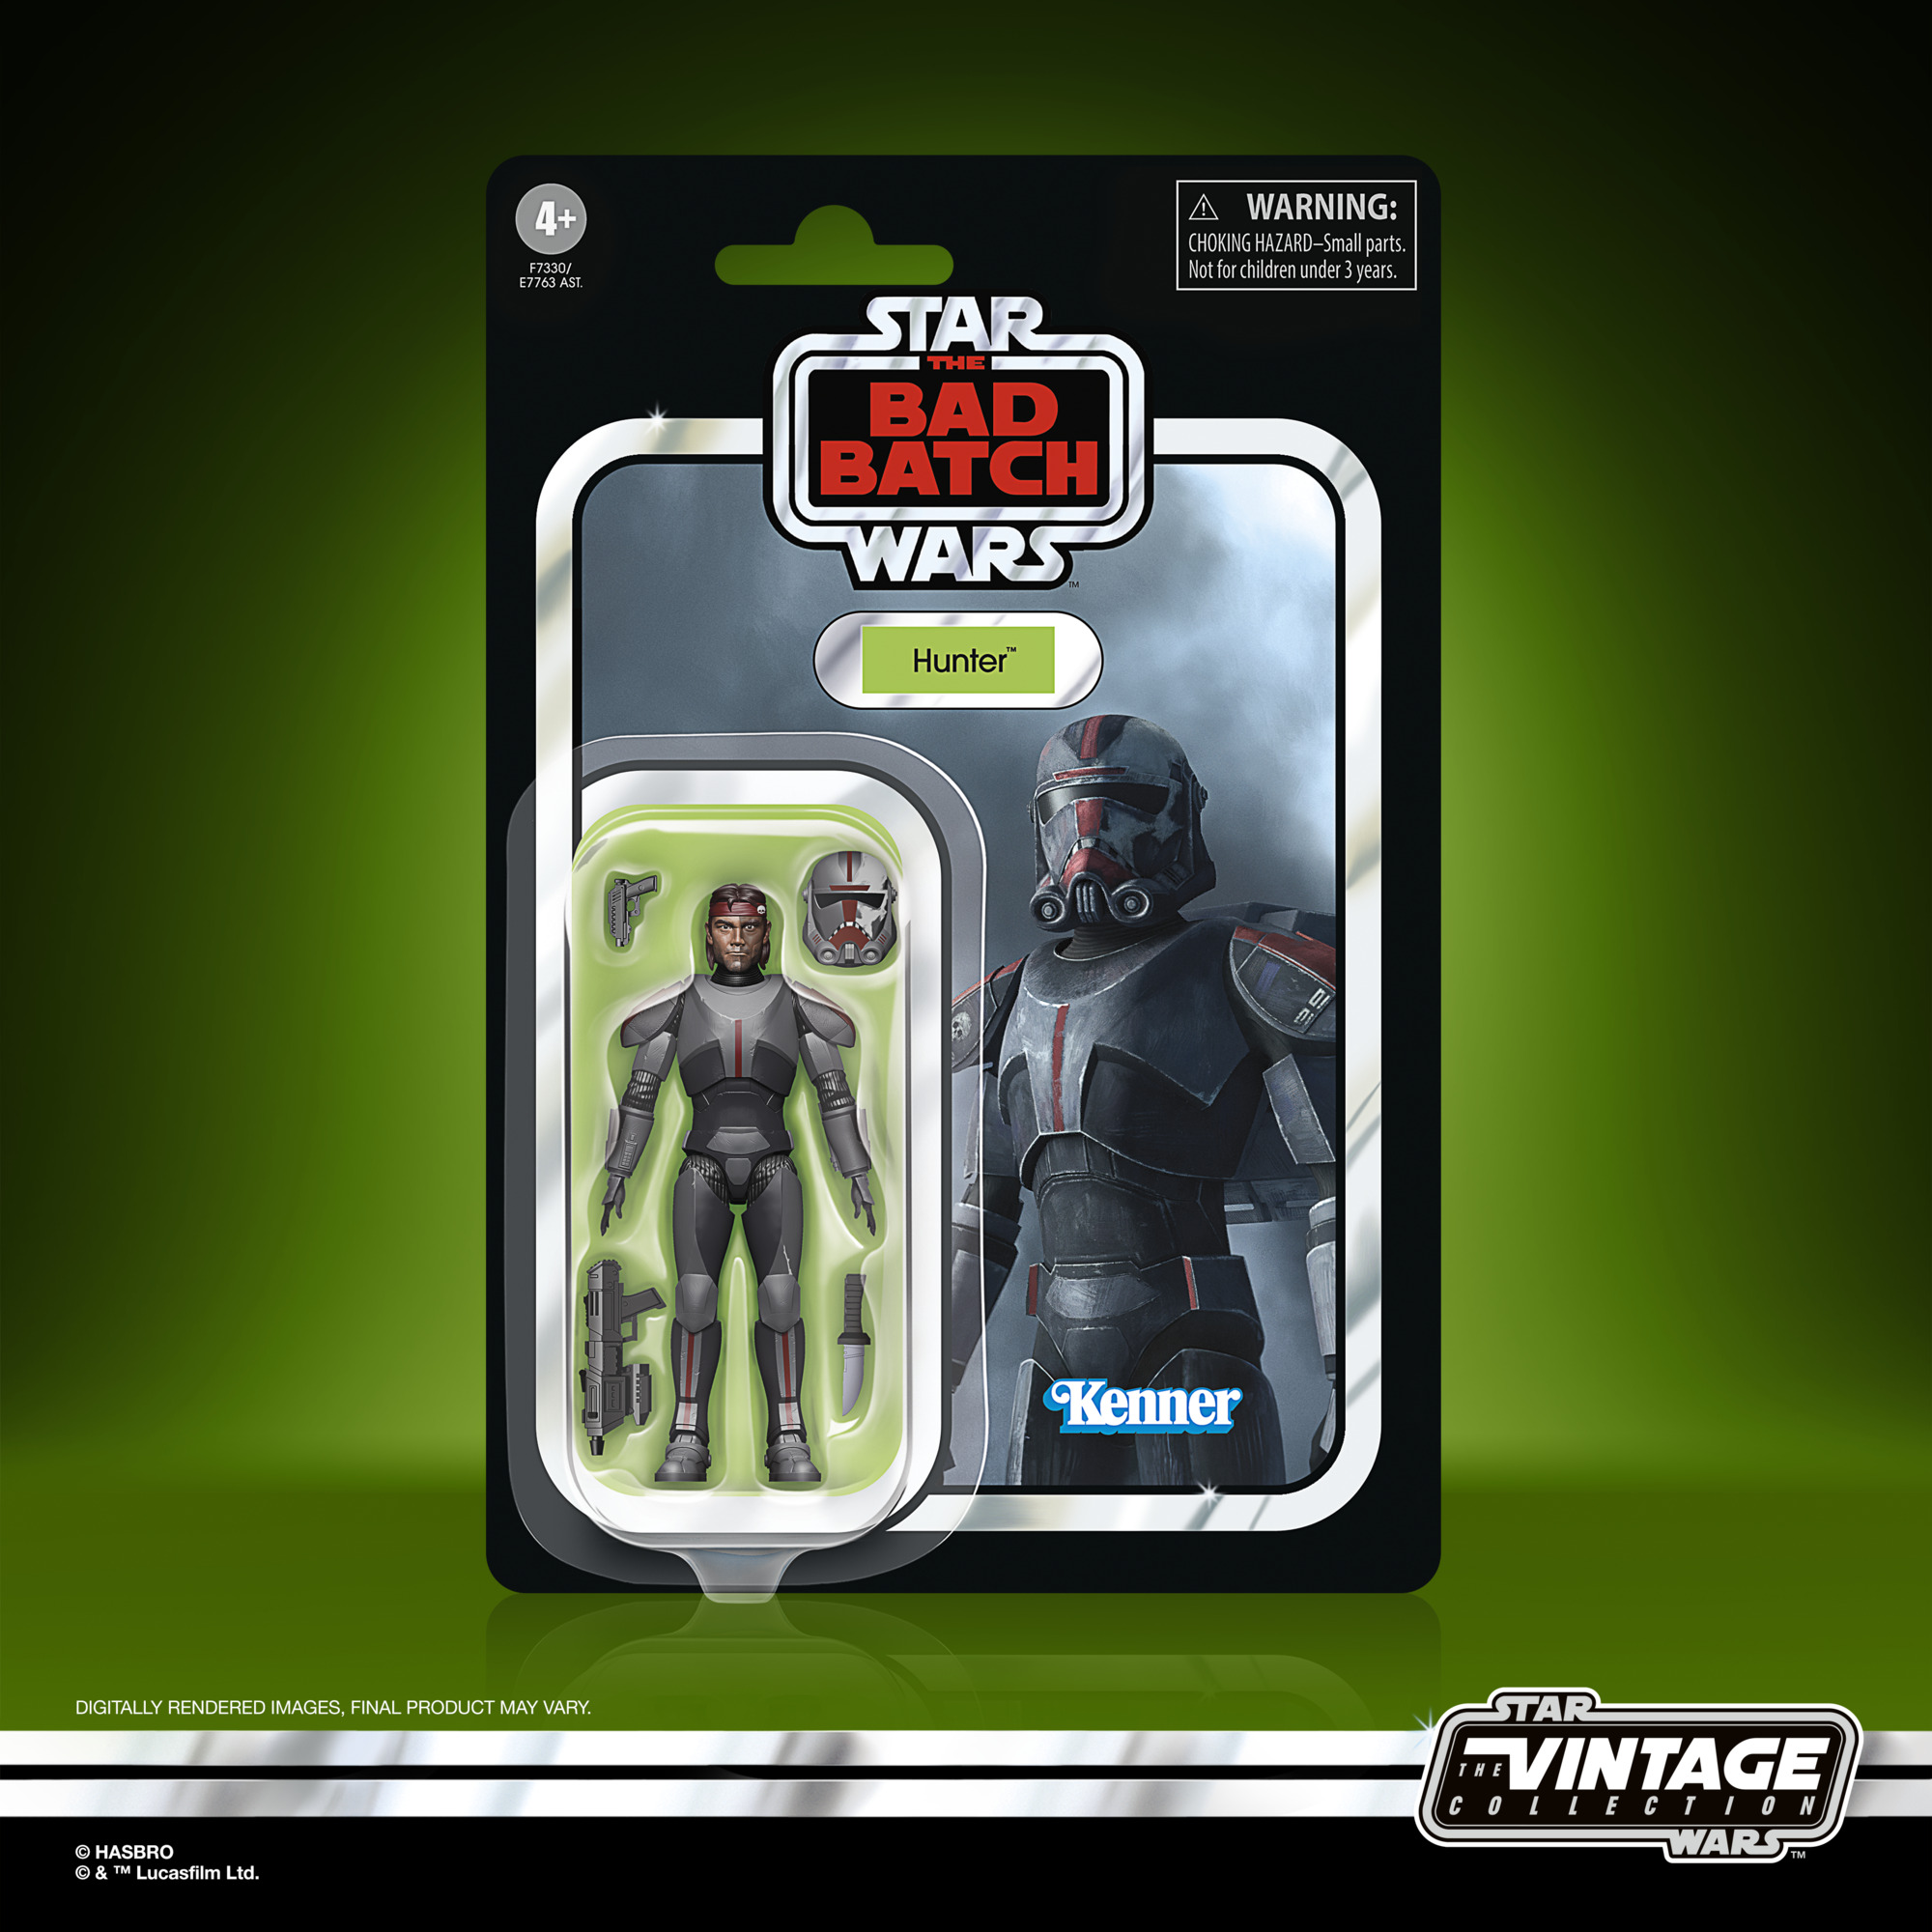 Star Wars: The Force Unleashed Starkiller Return to Hasbro's TVC